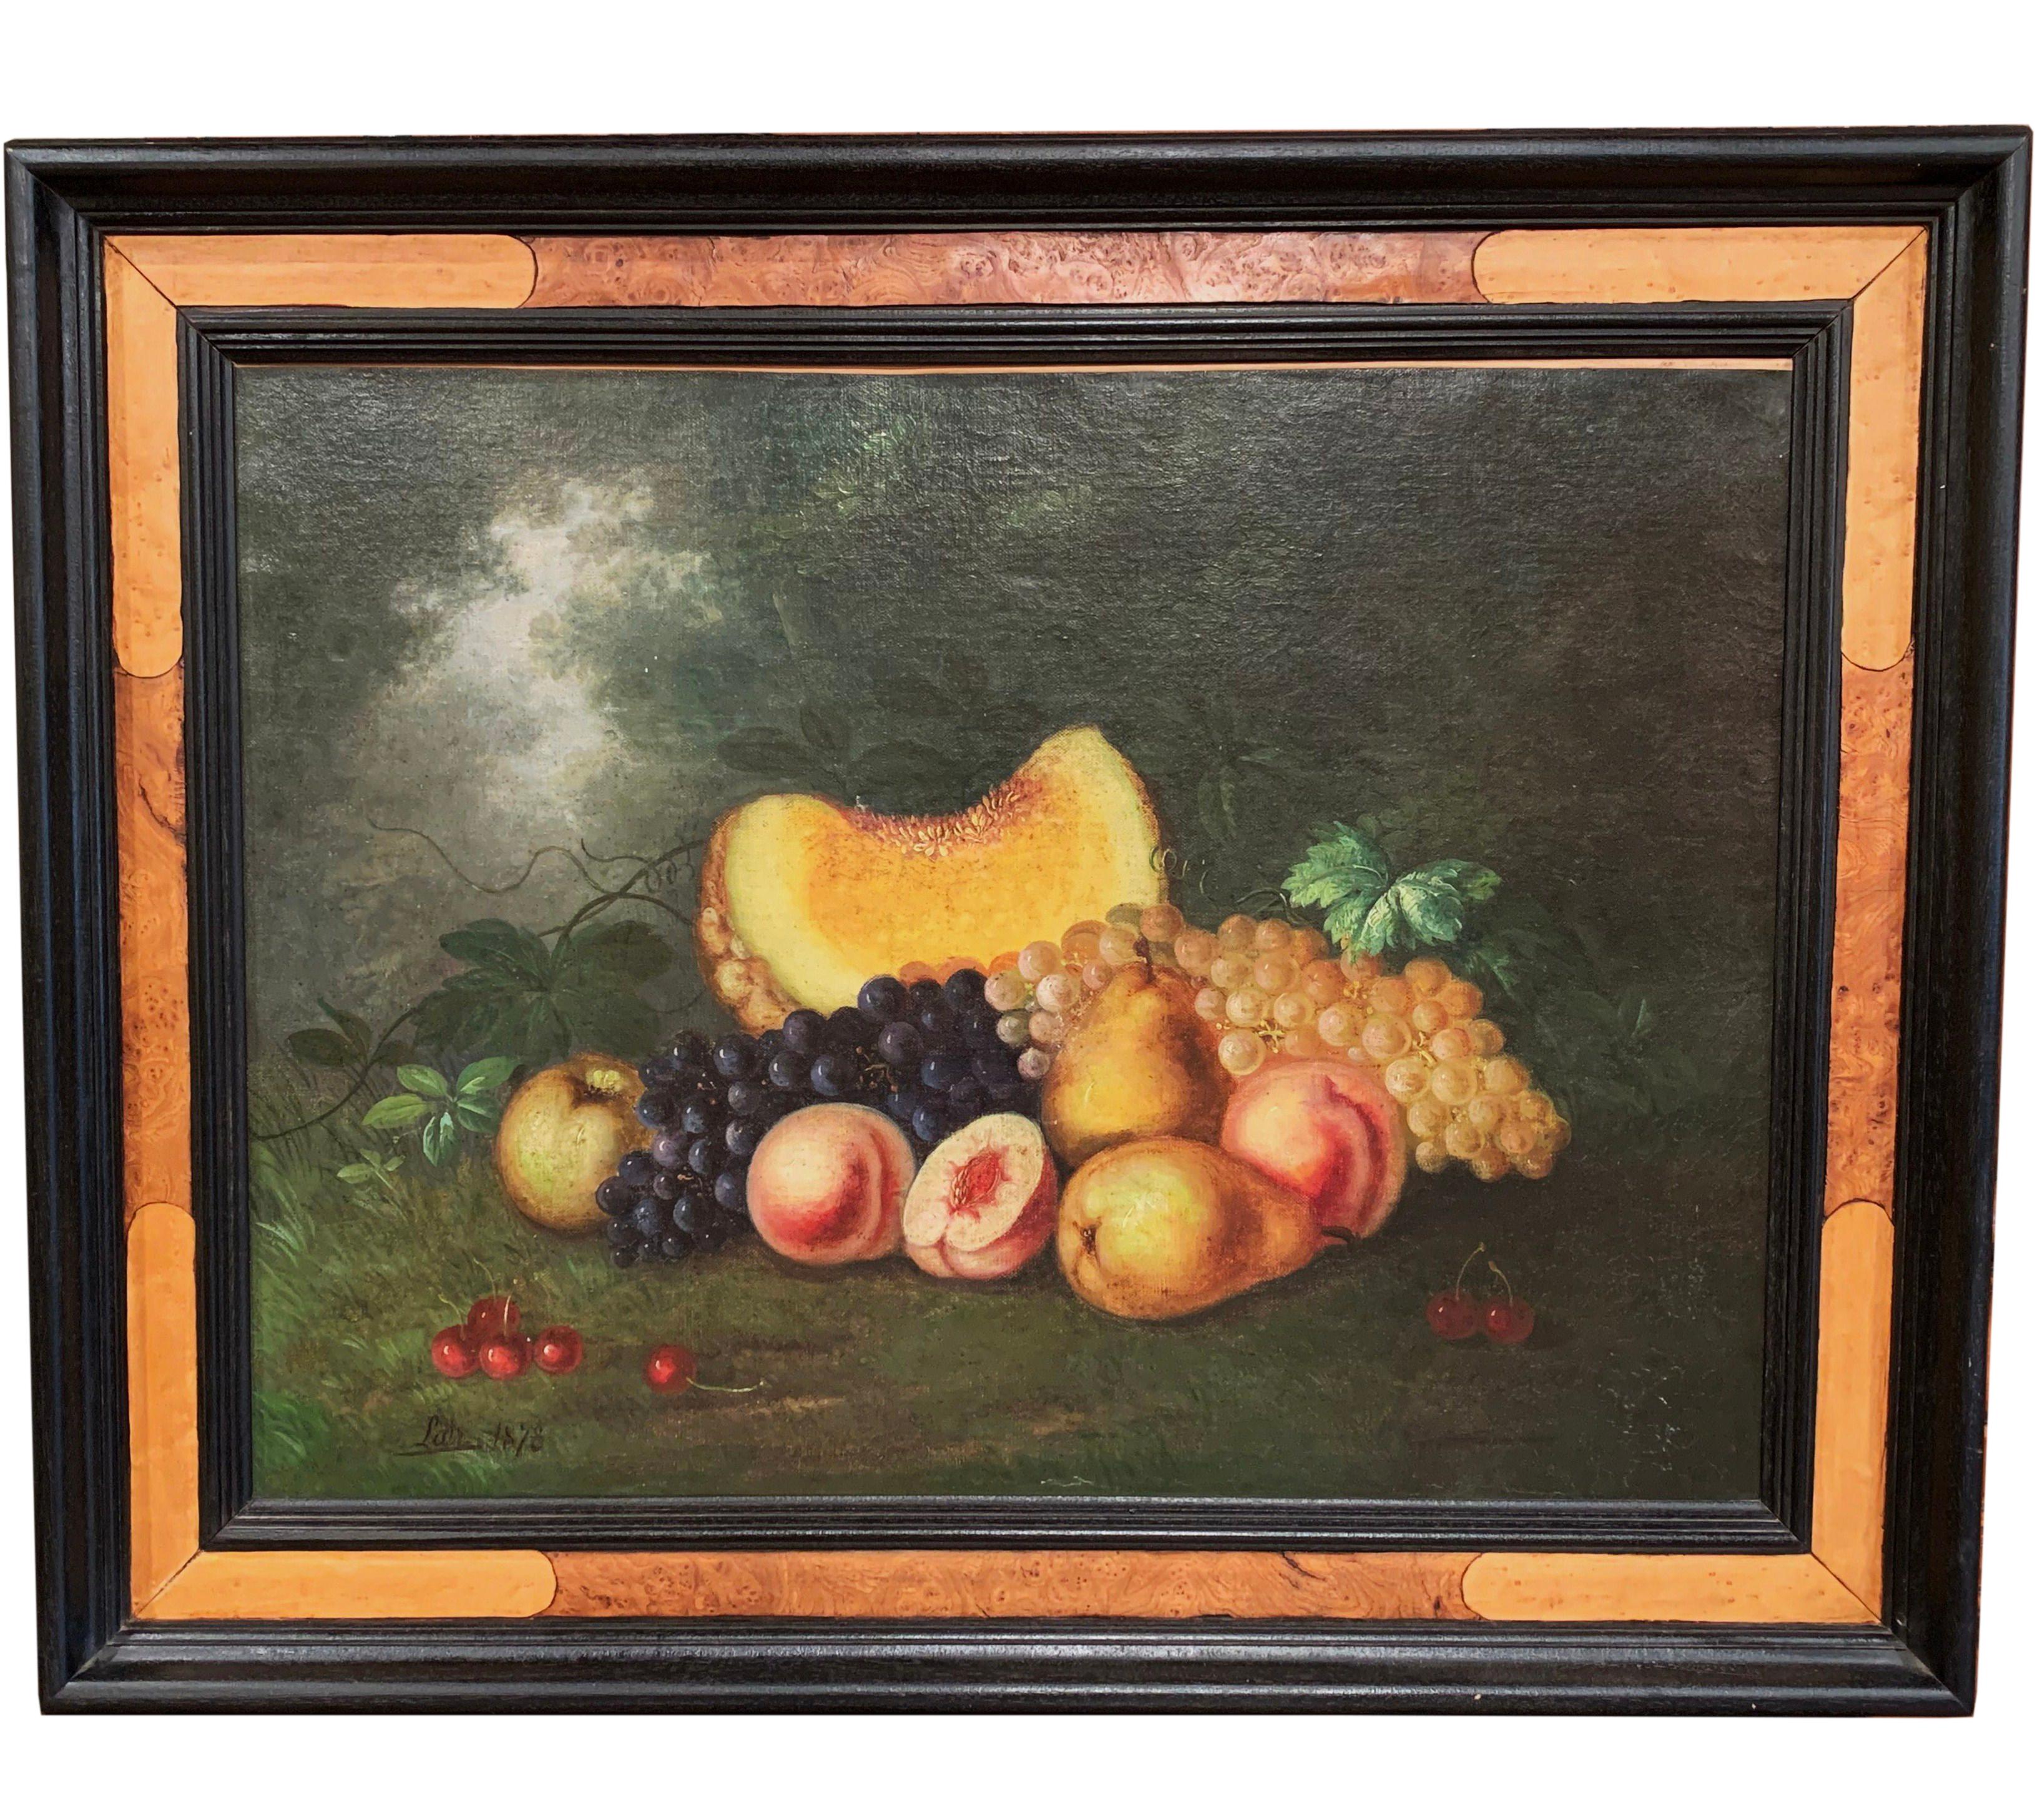 Unknown Still-Life Painting - 19th Century French Still Life Oil Painting on Canvas Signed and Dated 1878